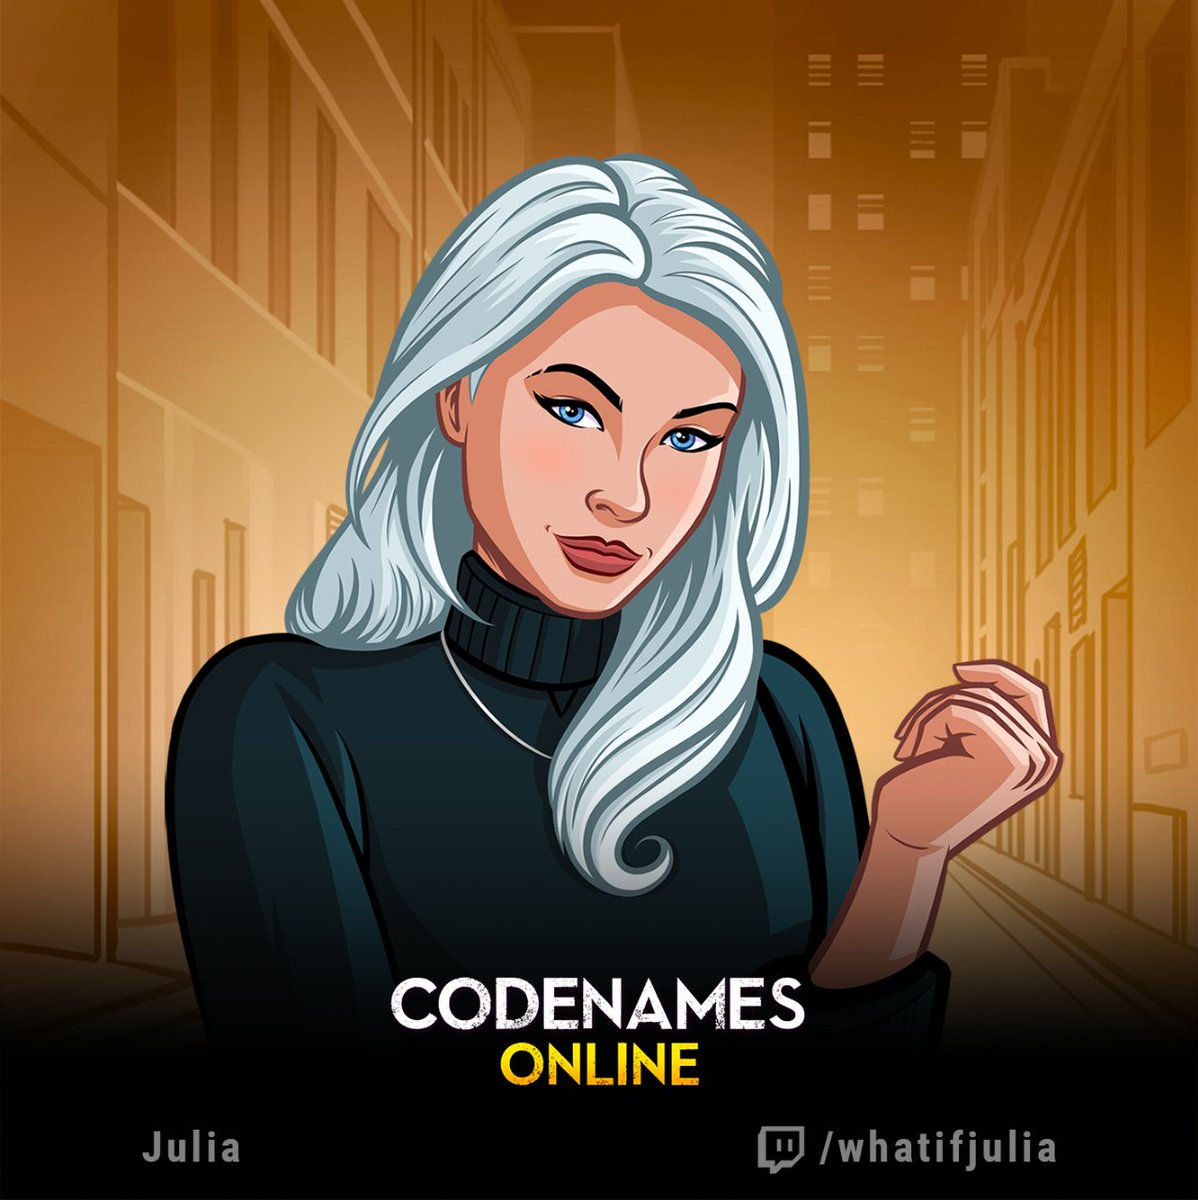 #CNcelebration

Meet @WhatifJulia, a streamer, pro photographer, and lover of turtle necks! Join her stream for a wide range of games, including #Codenames, and enjoy the cozy atmosphere!  

📺 twitch.tv/whatifjulia
⏱️ Pacific Time